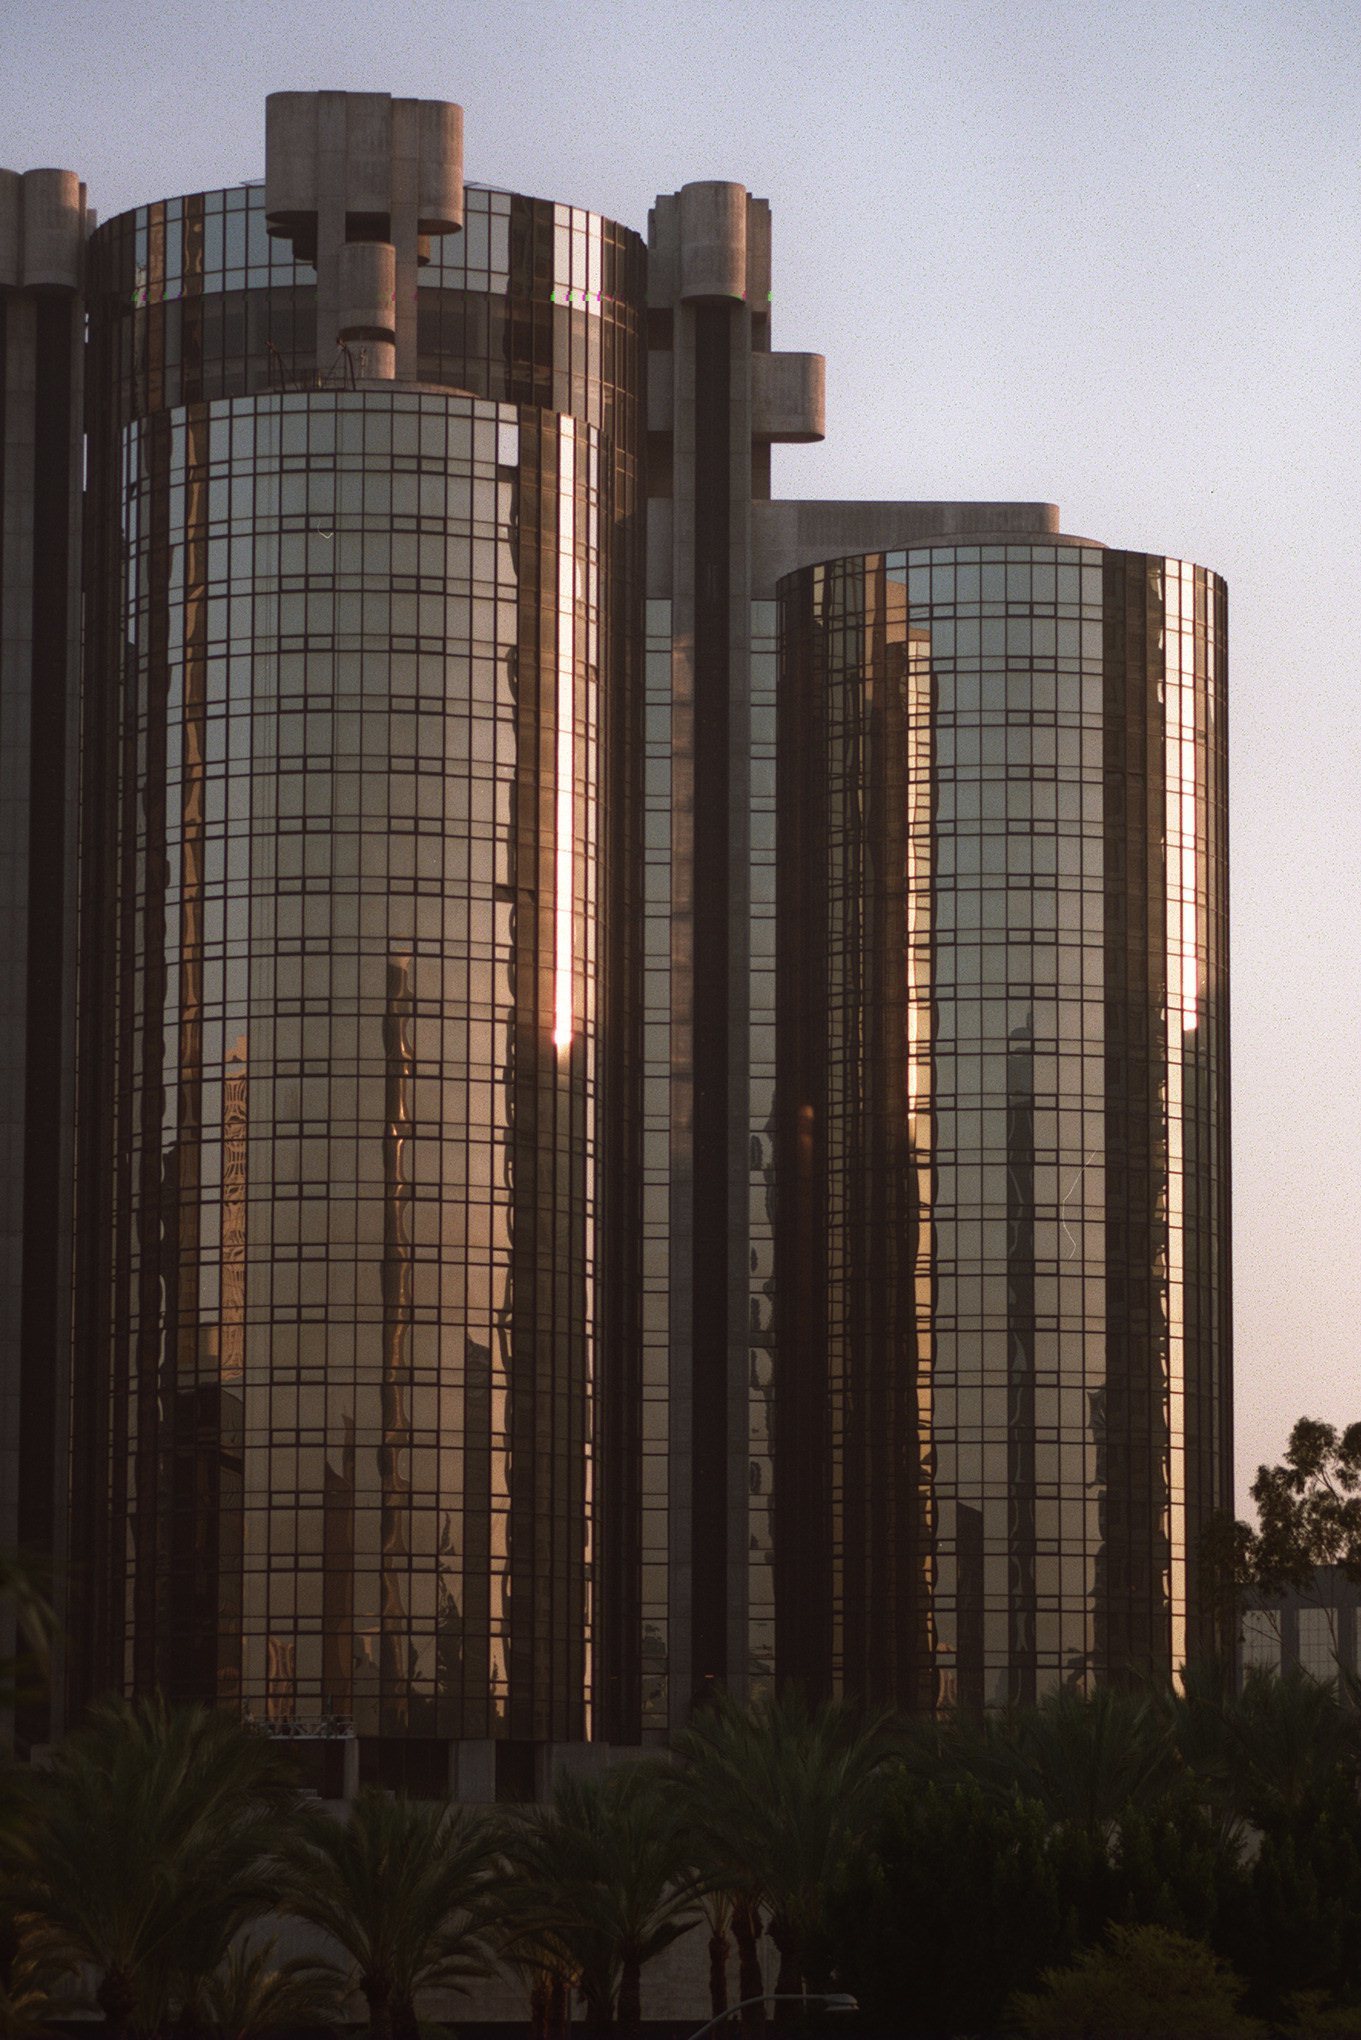 FI.Chinesereal. 1.pr.2/6/96 LOS ANGELESThe Westin Bonaventure in downtown Los Angeles is one of se